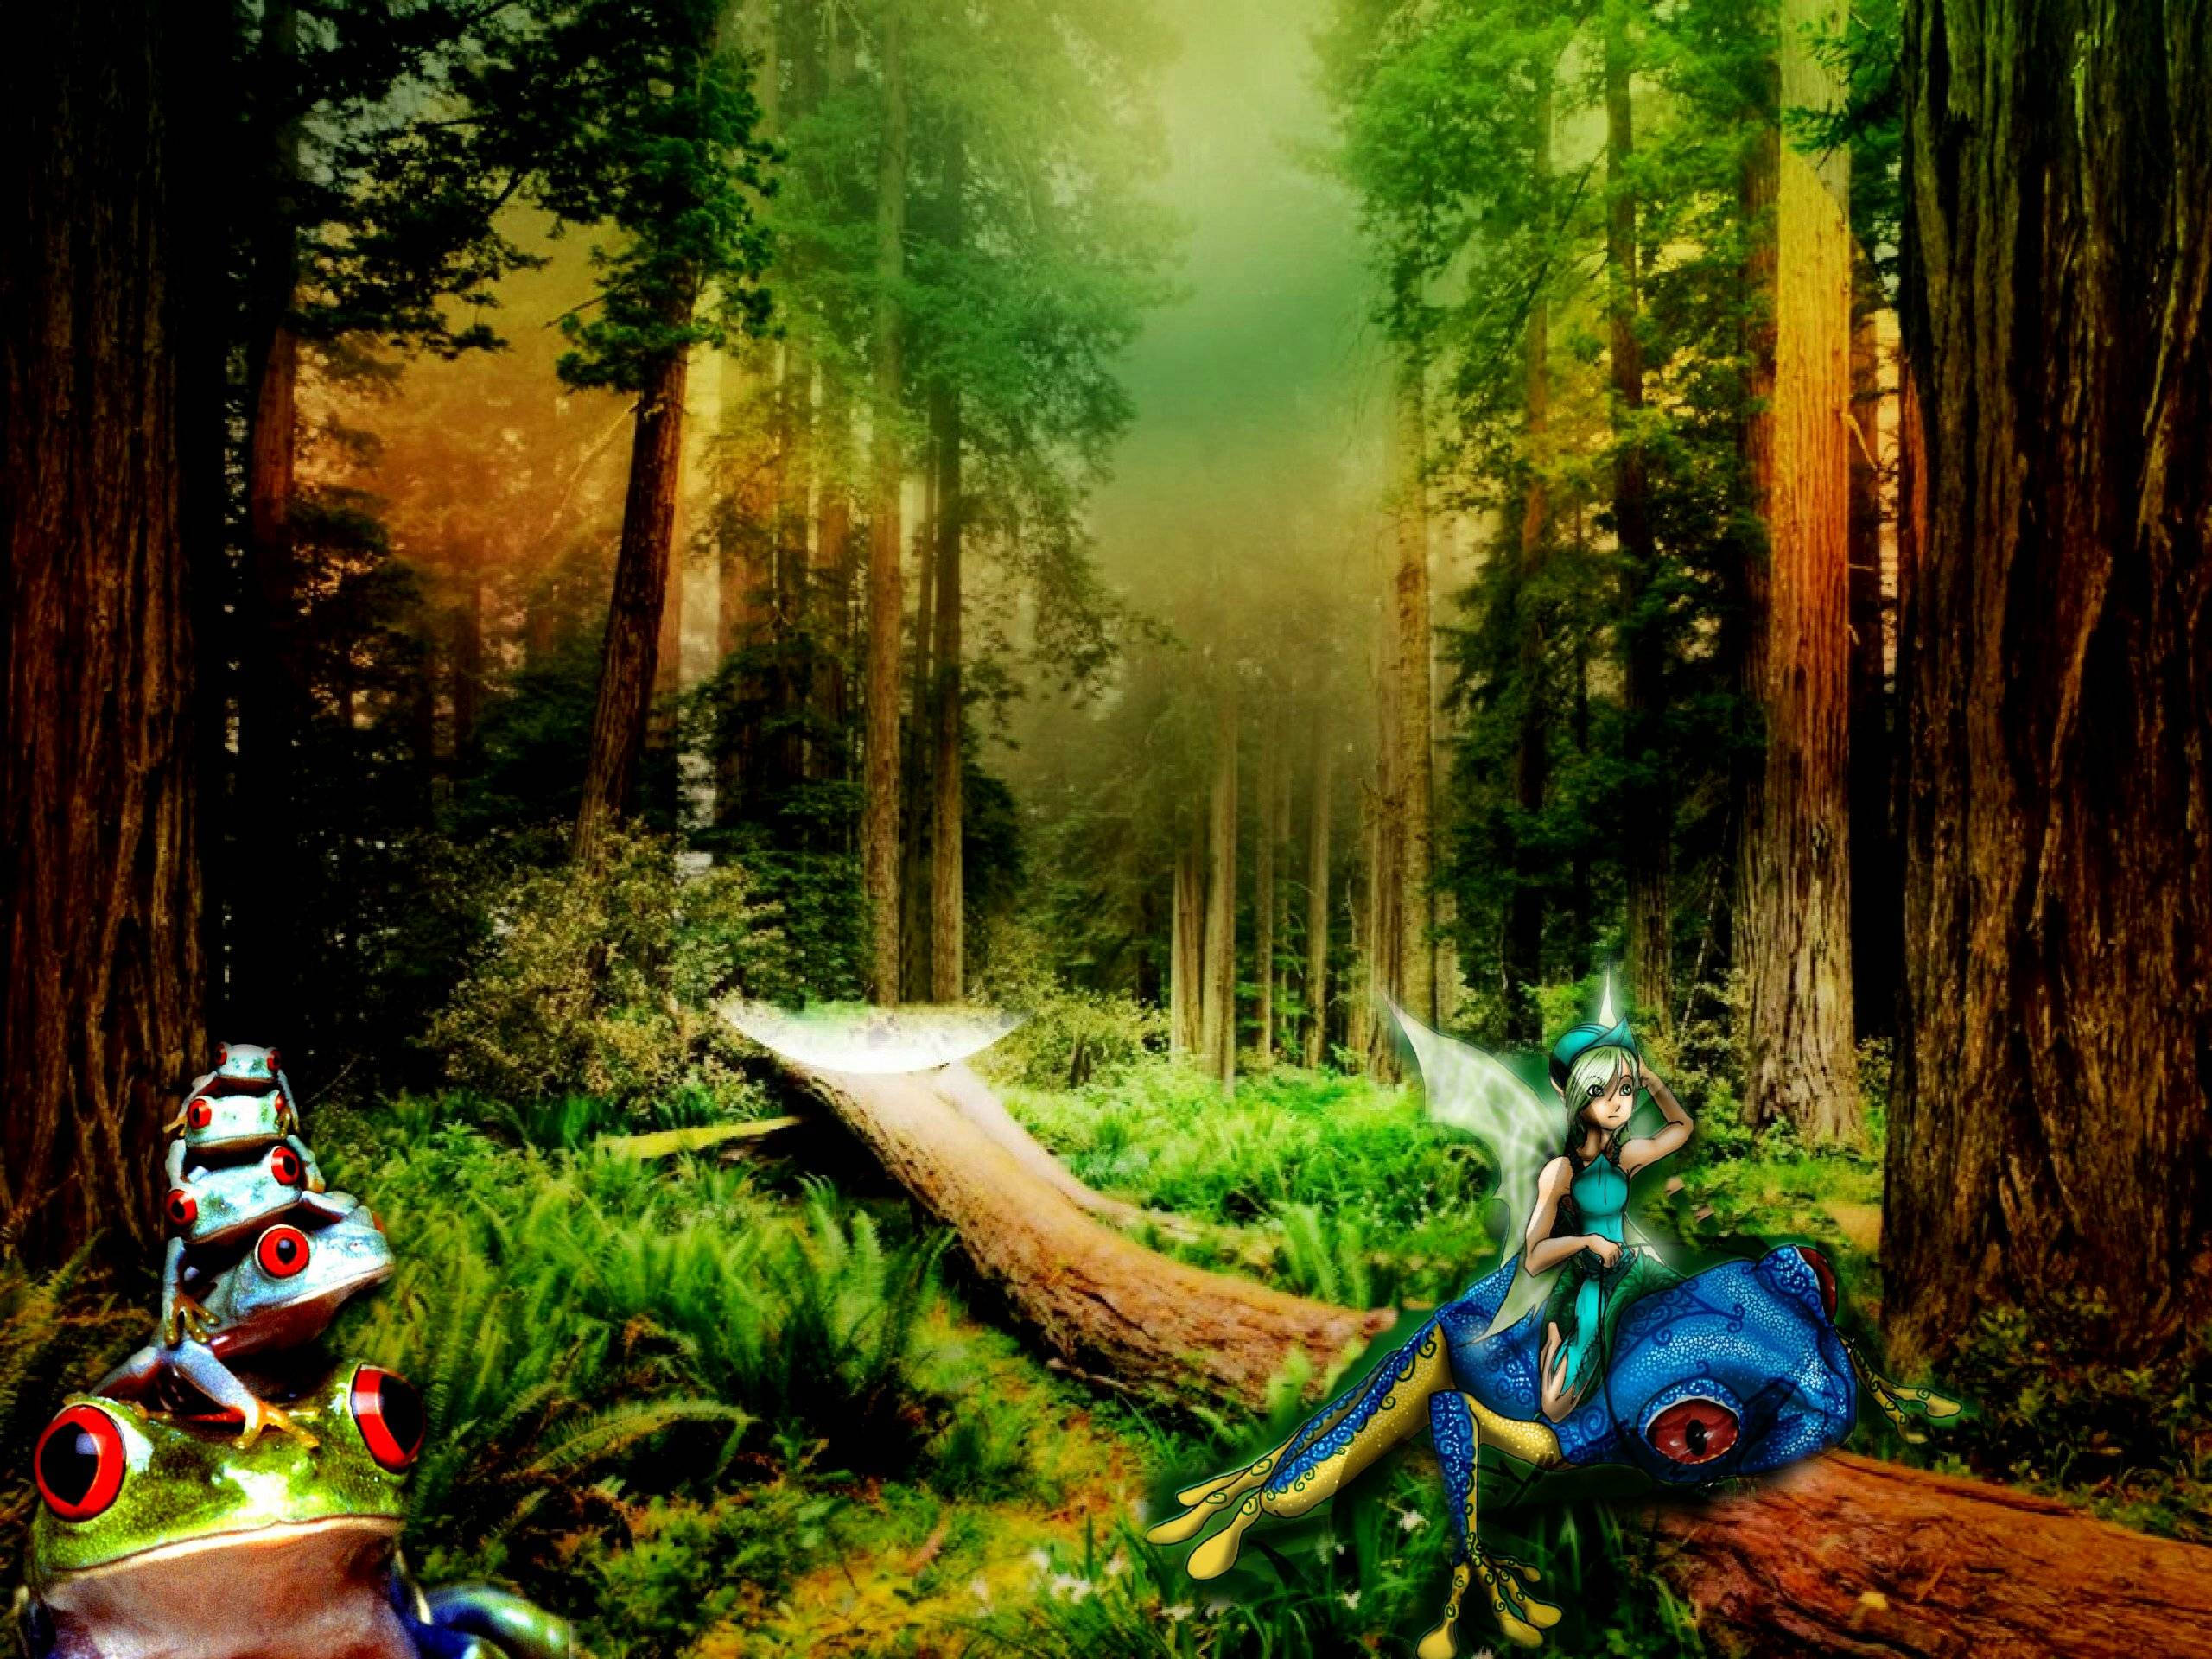 Fairy And Frogs In Enchanted Forest Background